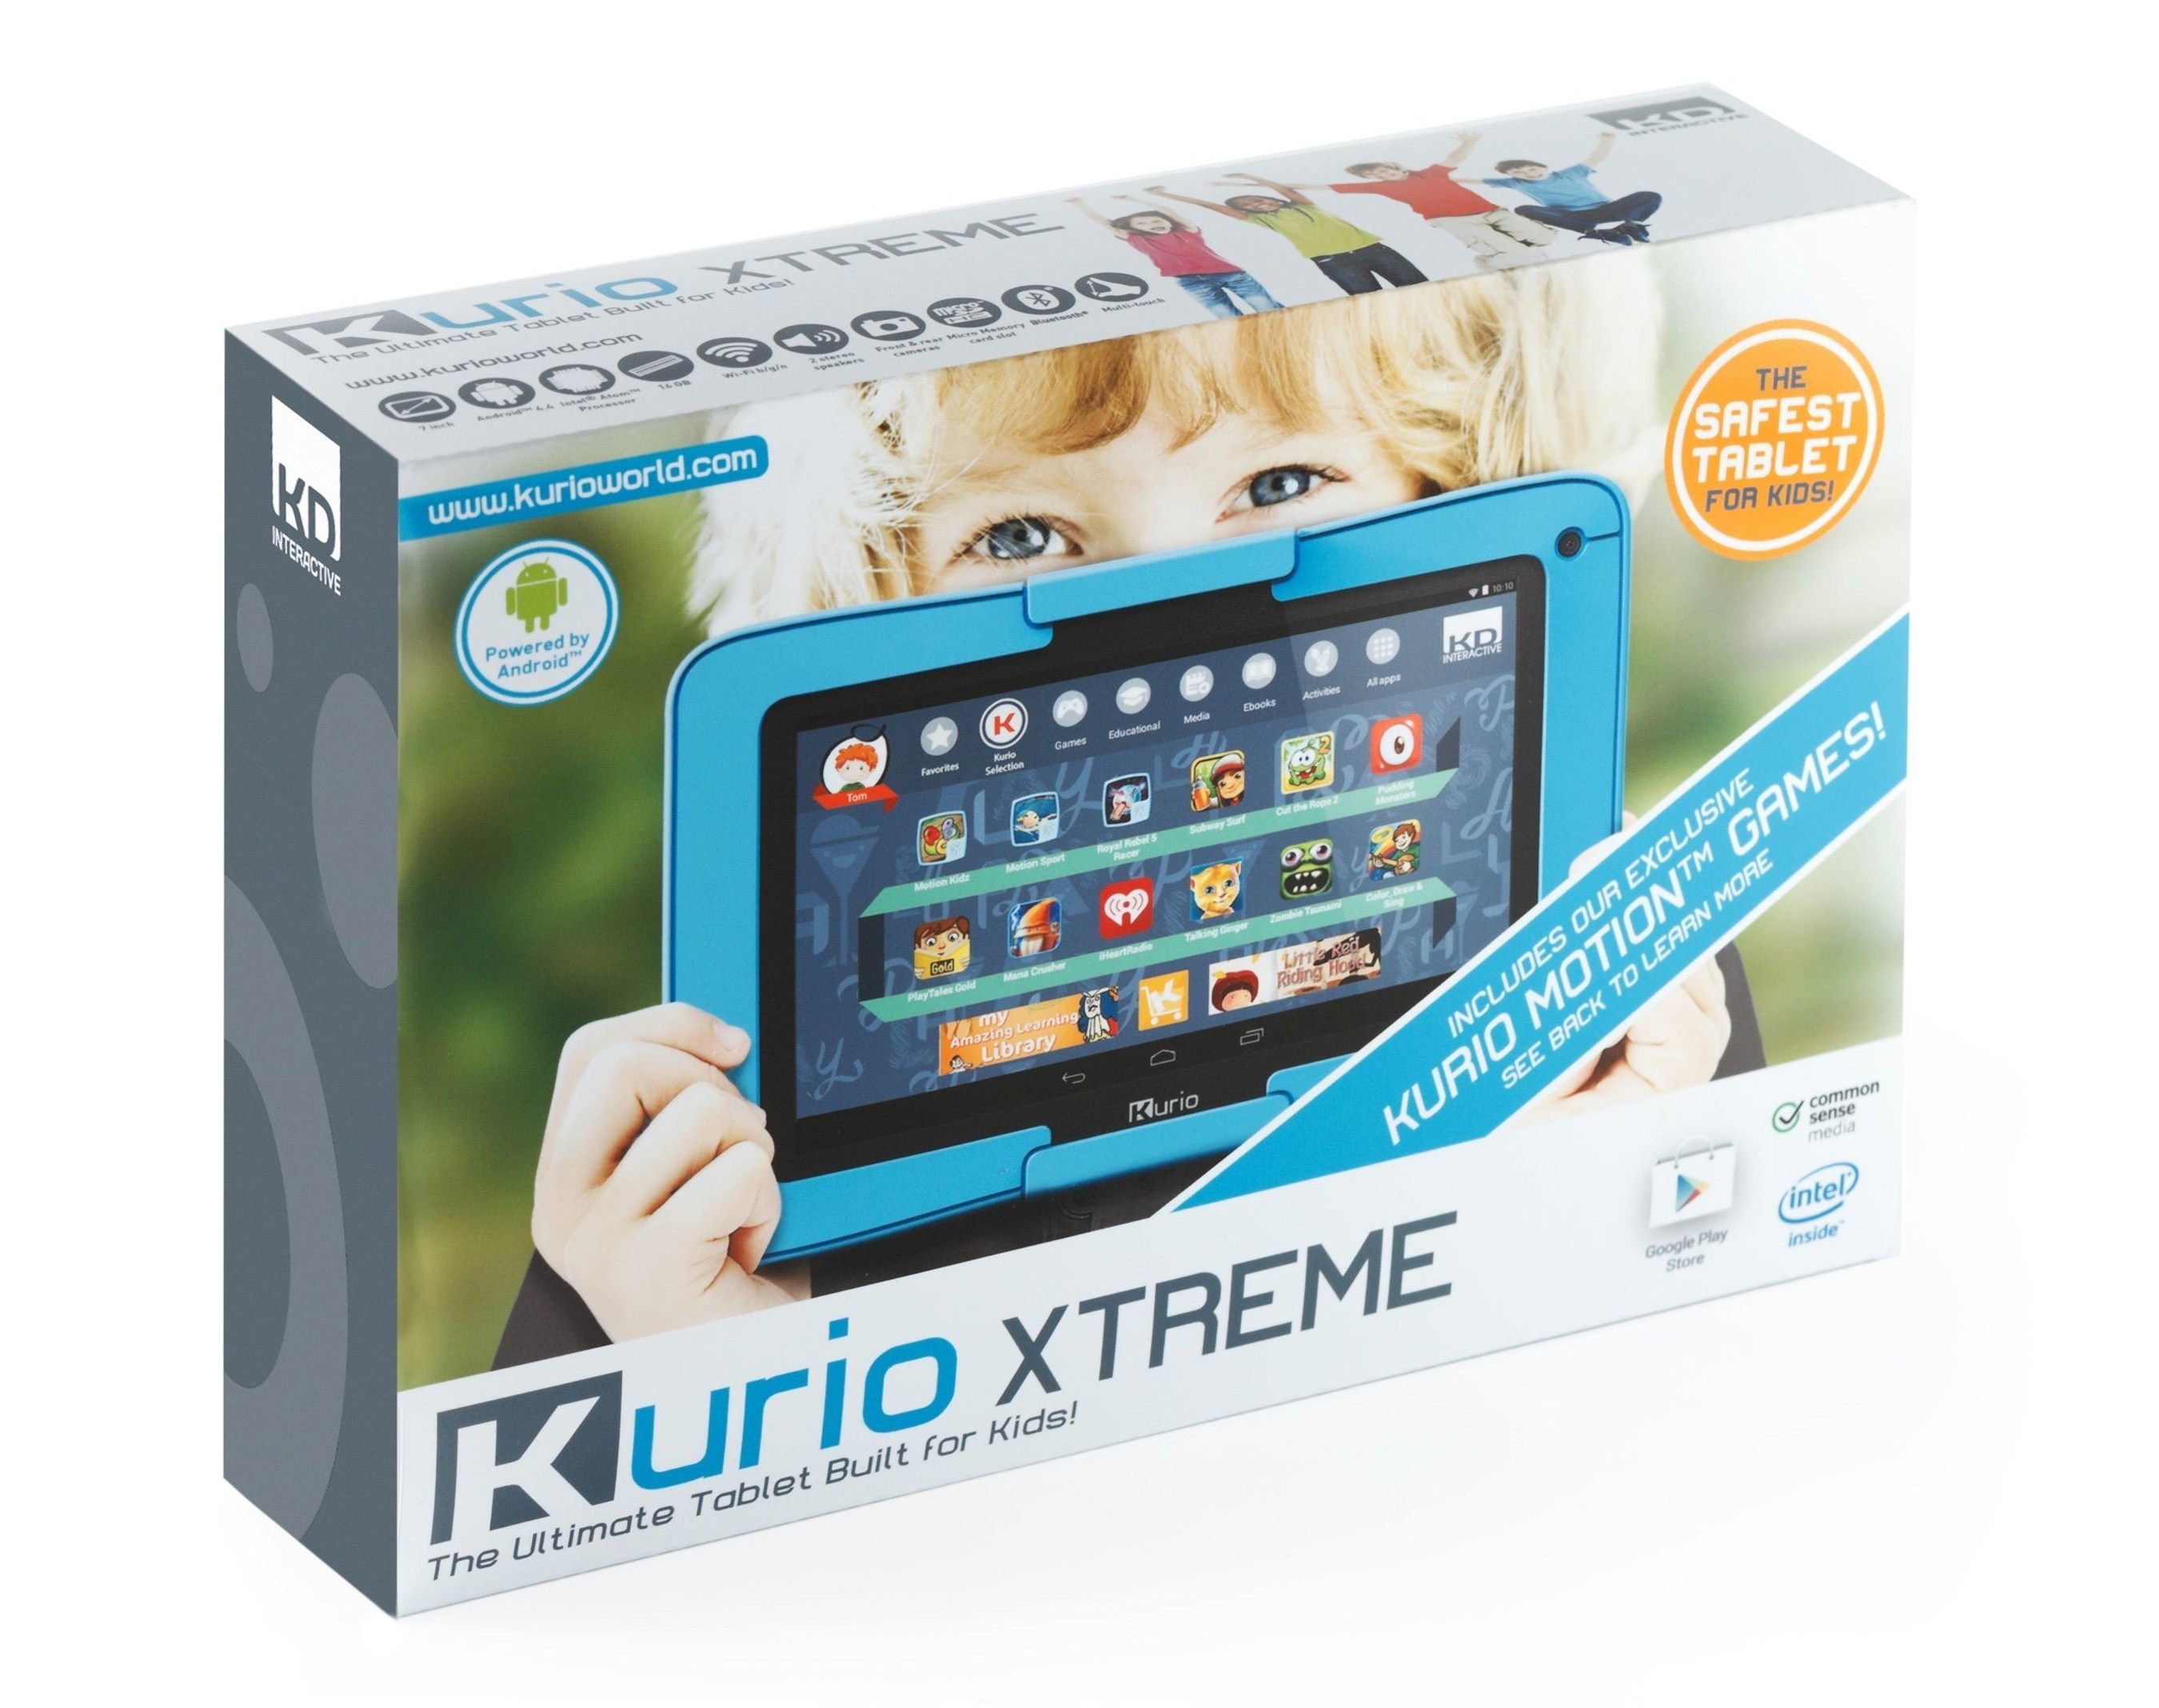 Techno Source's Kurio Xtreme, the Ultimate Android Tablet Built for Kids, is a 7" Wi-Fi enabled Android 4.4. device designed for extreme play and the safest online experience.  Now featuring an Intel Atom processor, Google Play, 24/7 customer support right from the tablet, exclusive body motion gaming, and preloaded with more than $300 worth of apps, games and more.  Available at major retailers nationwide and online beginning October 1, 2014. (PRNewsFoto/Techno Source)